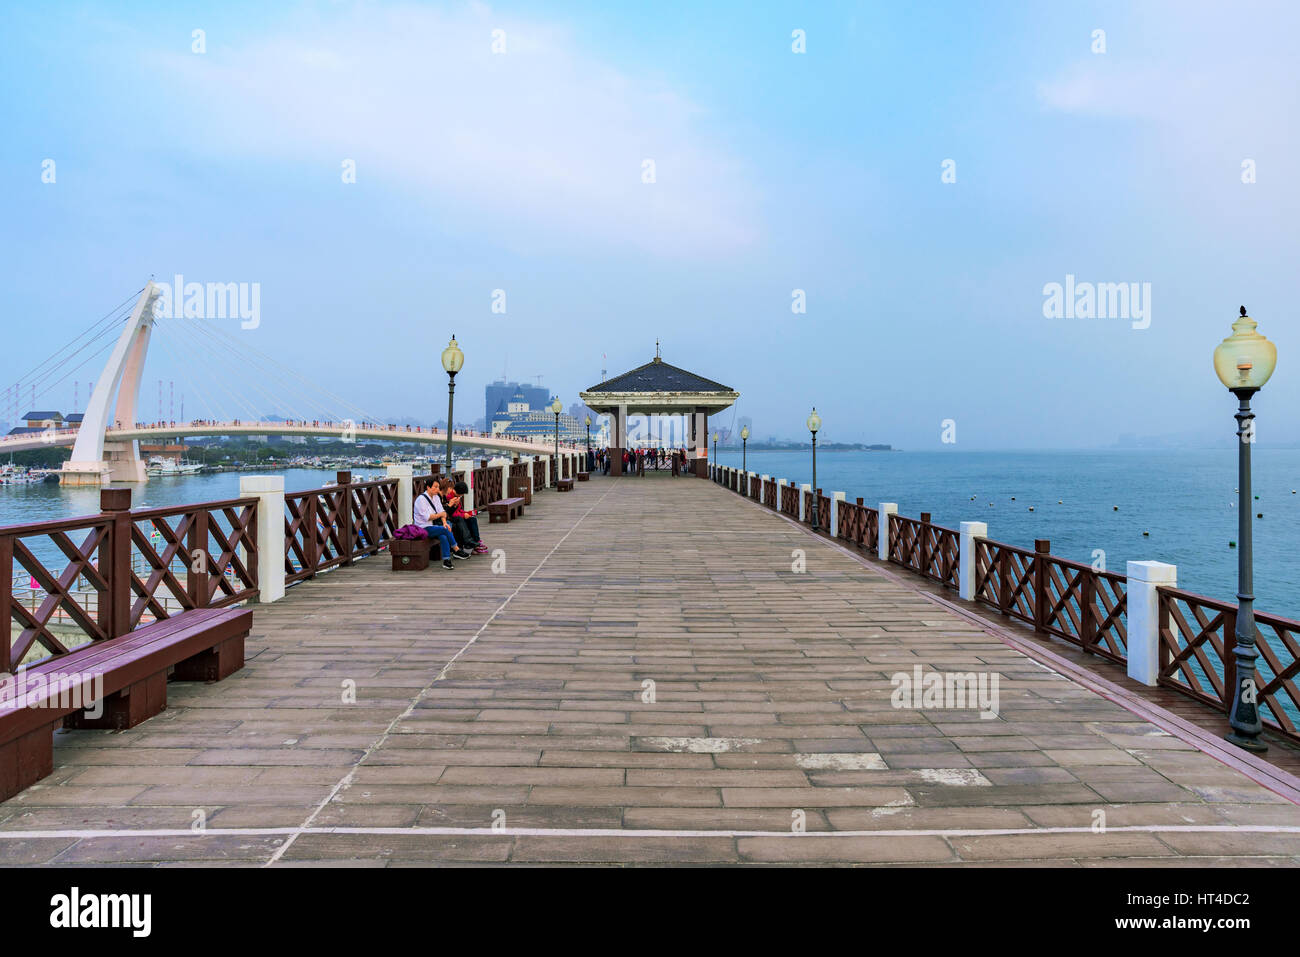 TAIPEI, TAIWAN - JANUARY 05: Pier in Fishermans wharf area in Tamsui where people come to relax and take photos on January 05, 2017 in Taipei Stock Photo